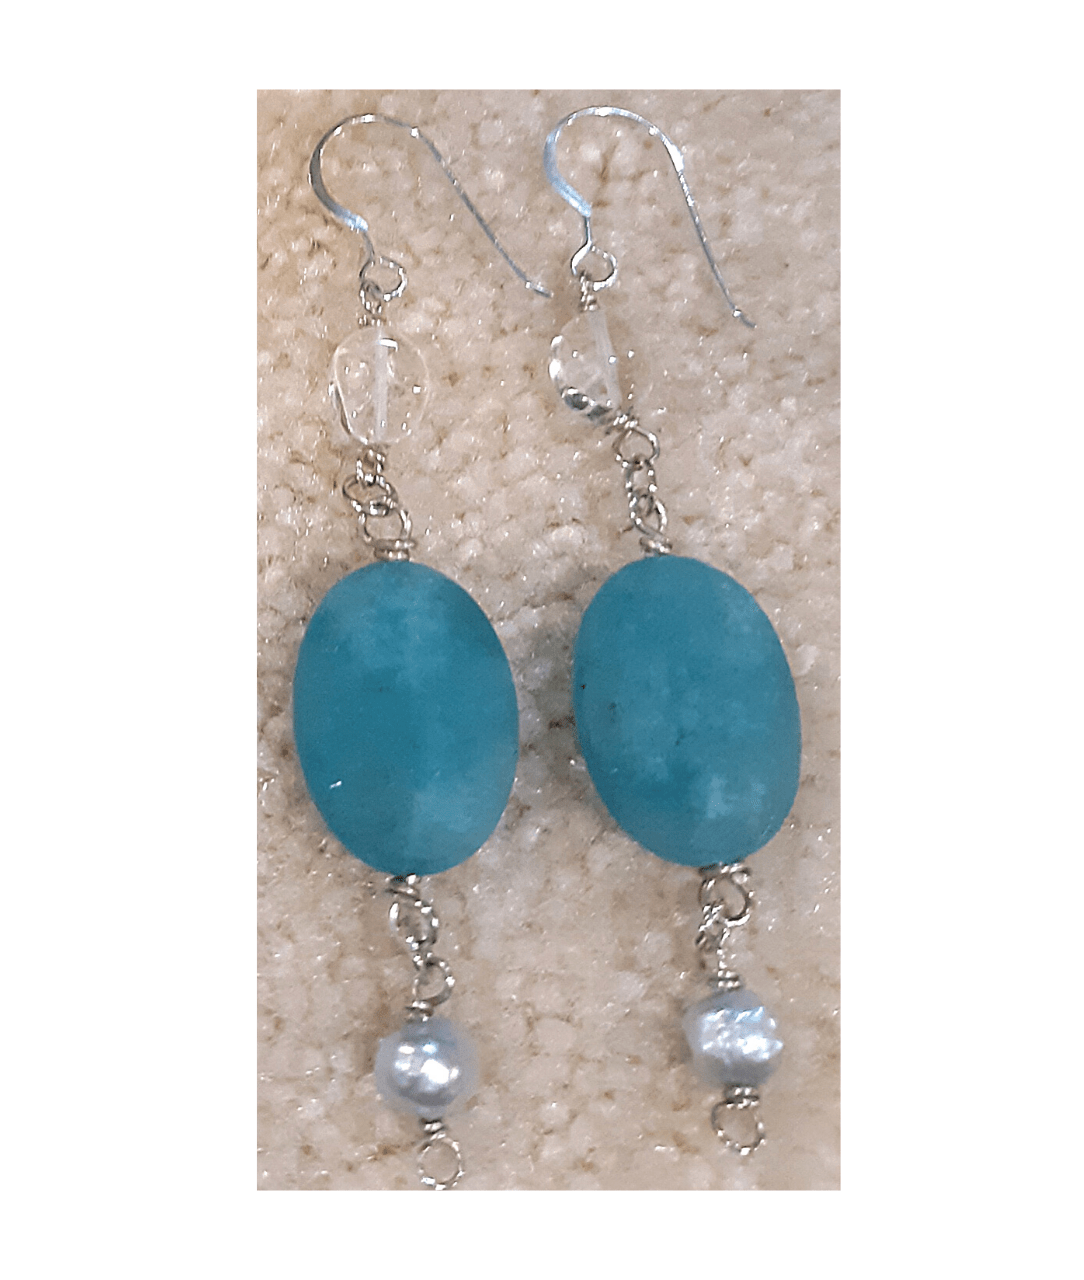 Clear Crystal Quartz, Faceted Dyed Oval Blue Jade and Light Blue Genuine Pearl Sterling Silver Dangle Earrings approx. 2 3/4"